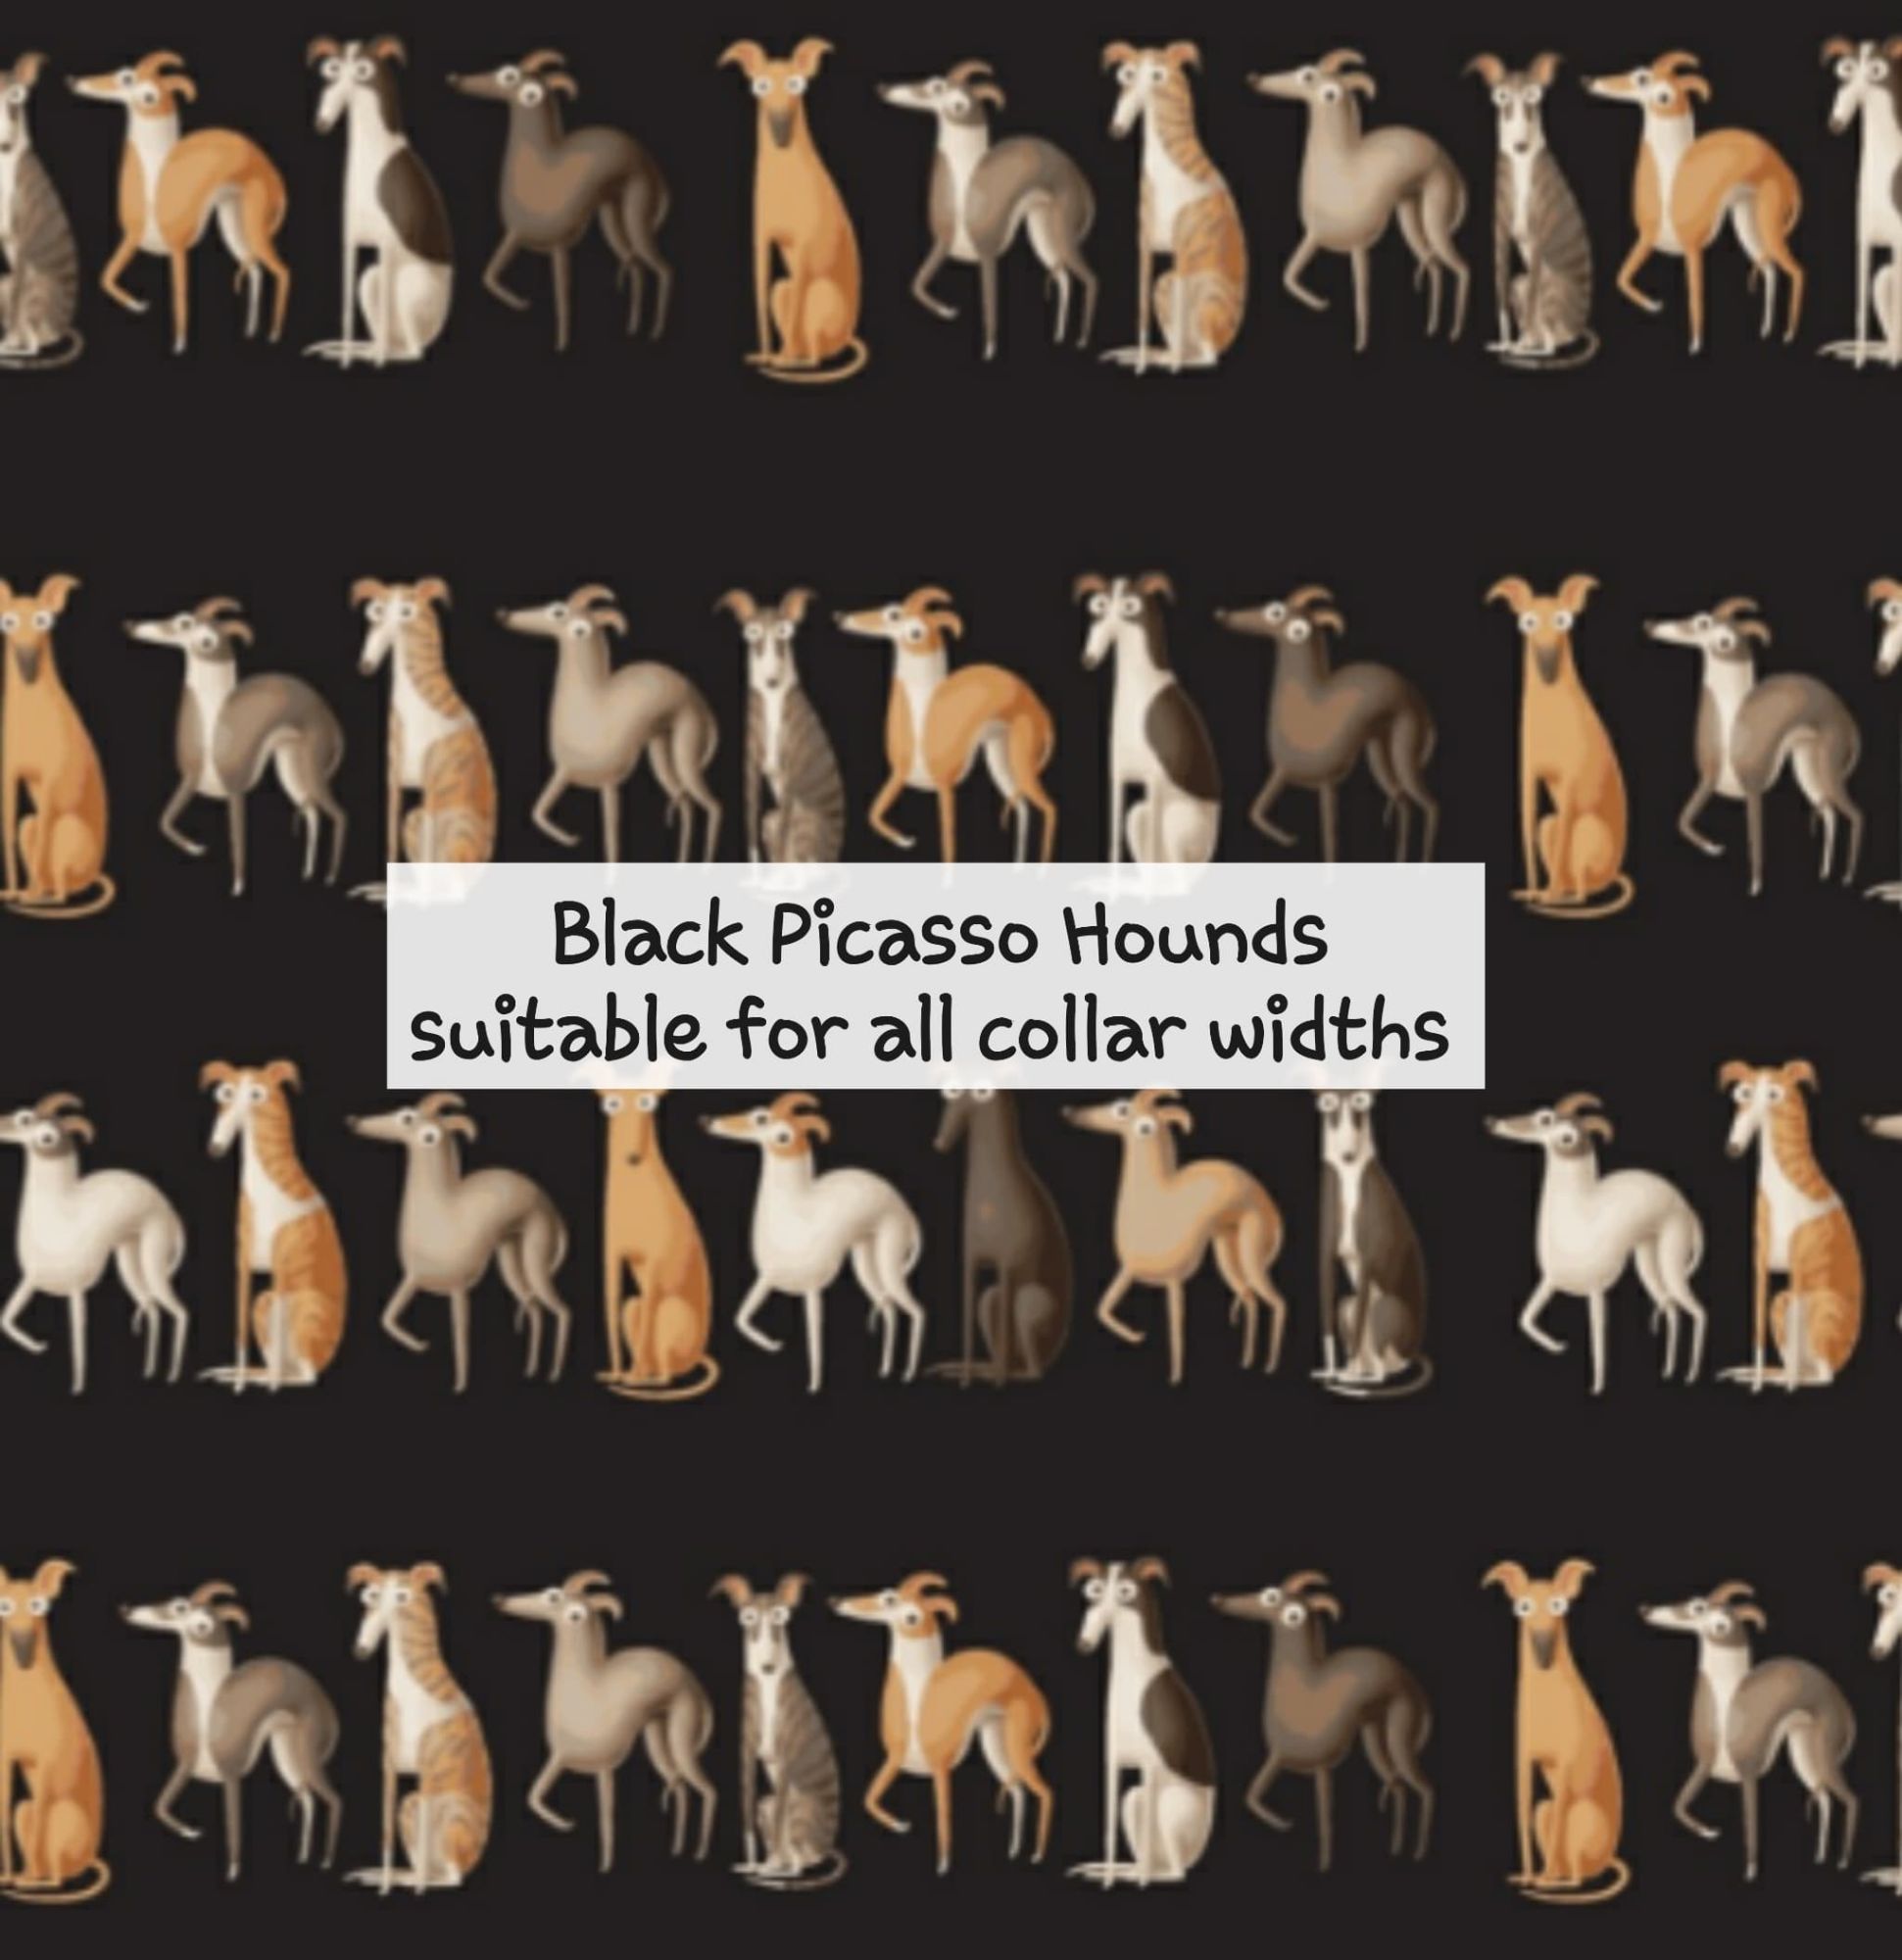 Black Picasso Hounds - Suitable for all collar widths